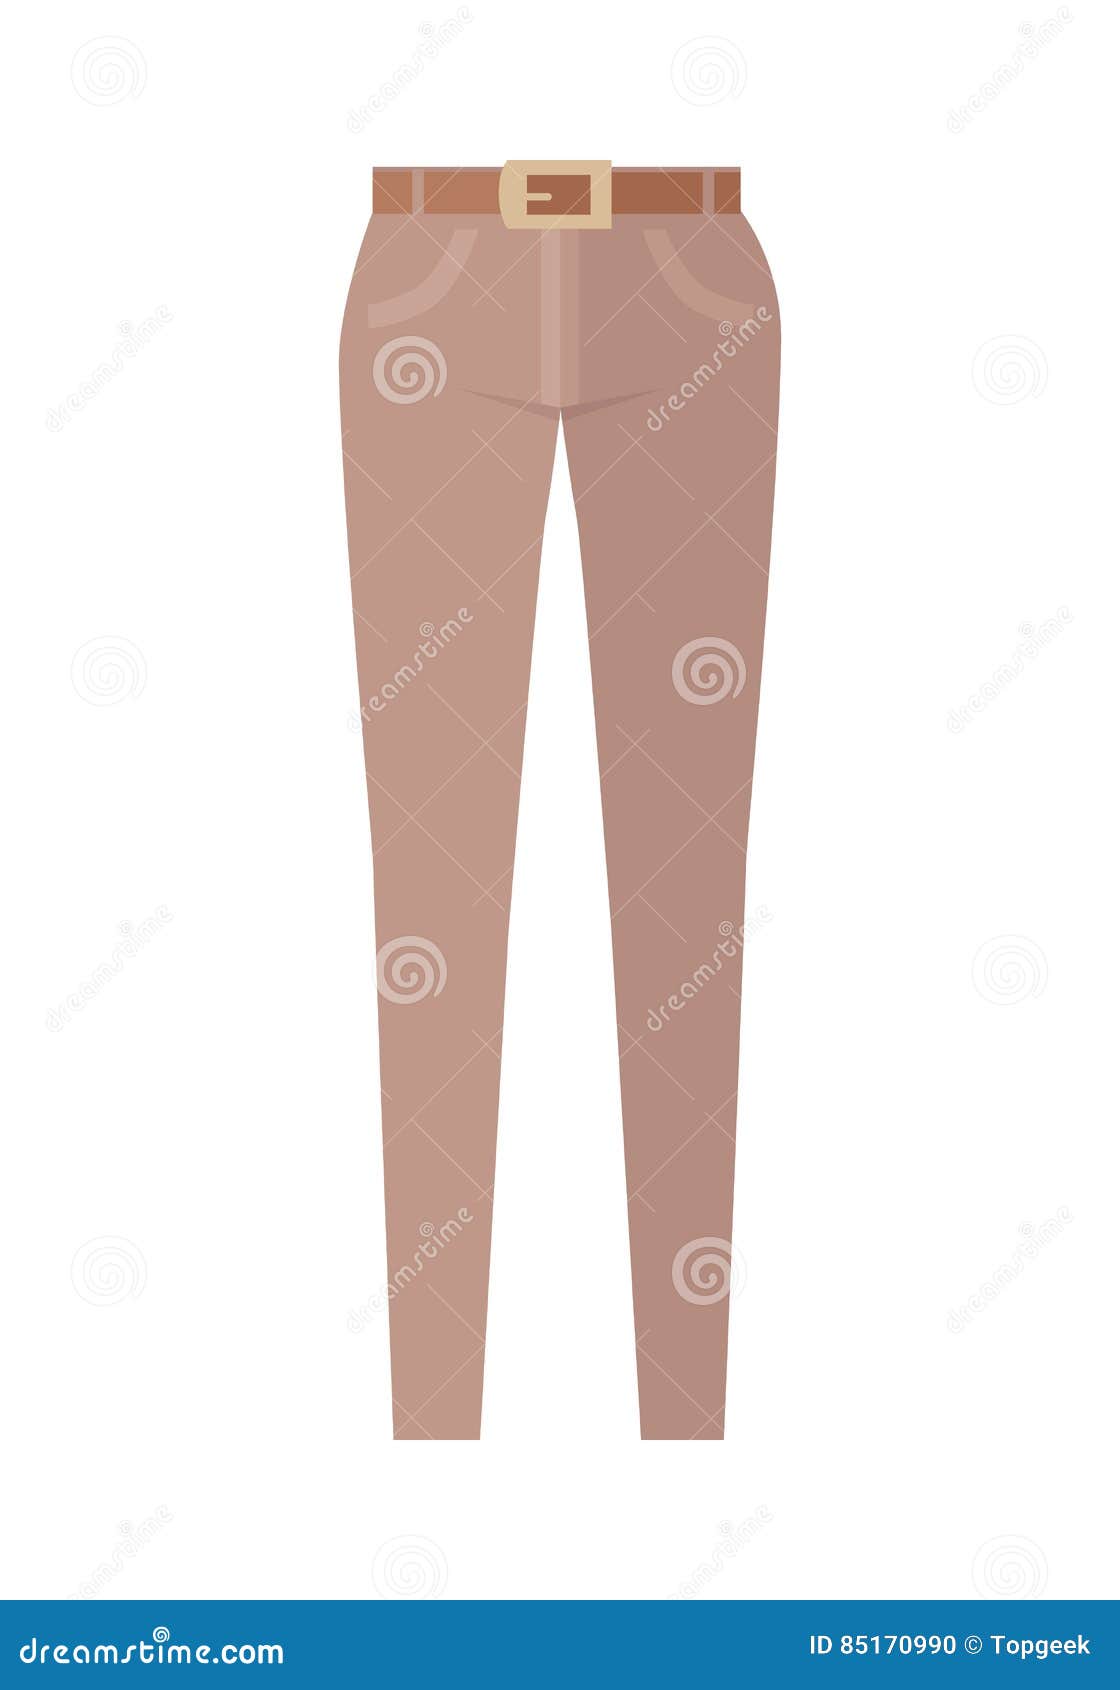 Trousers Unisex Pants Isolated on White Background Stock Vector ...